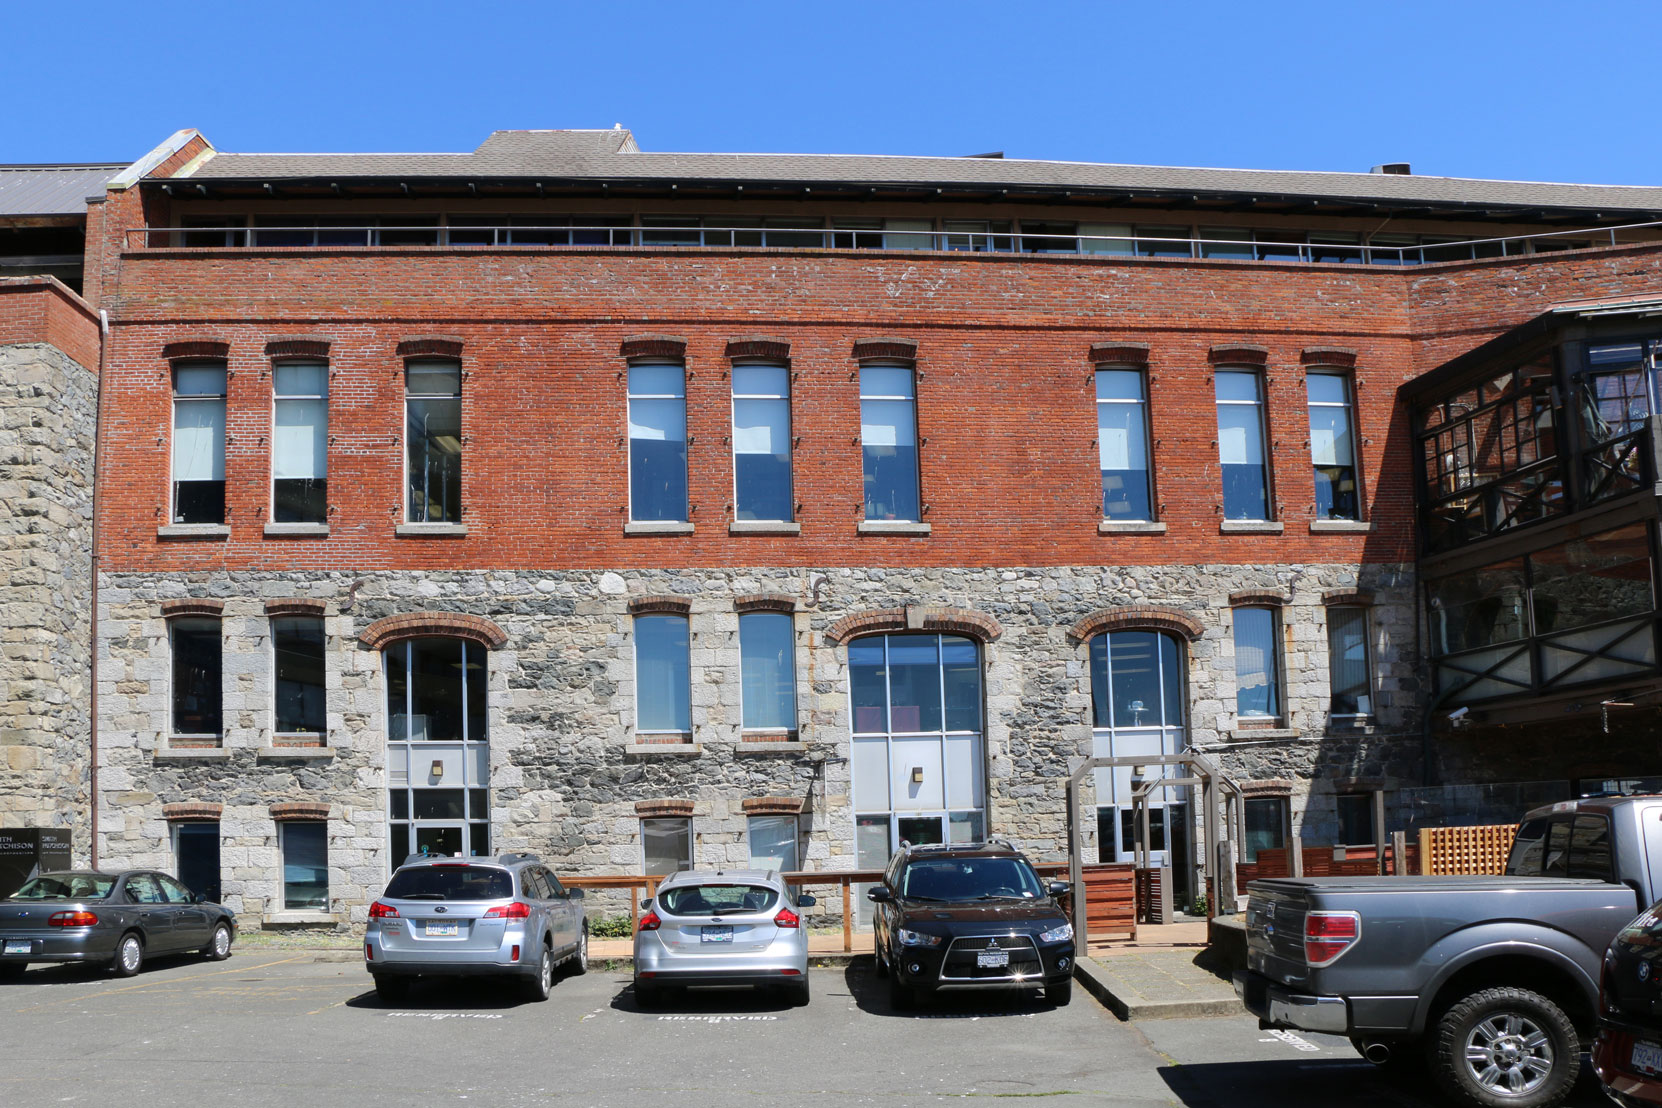 The west, or rear, harbour facing elevation of 1202-1214 Wharf Street